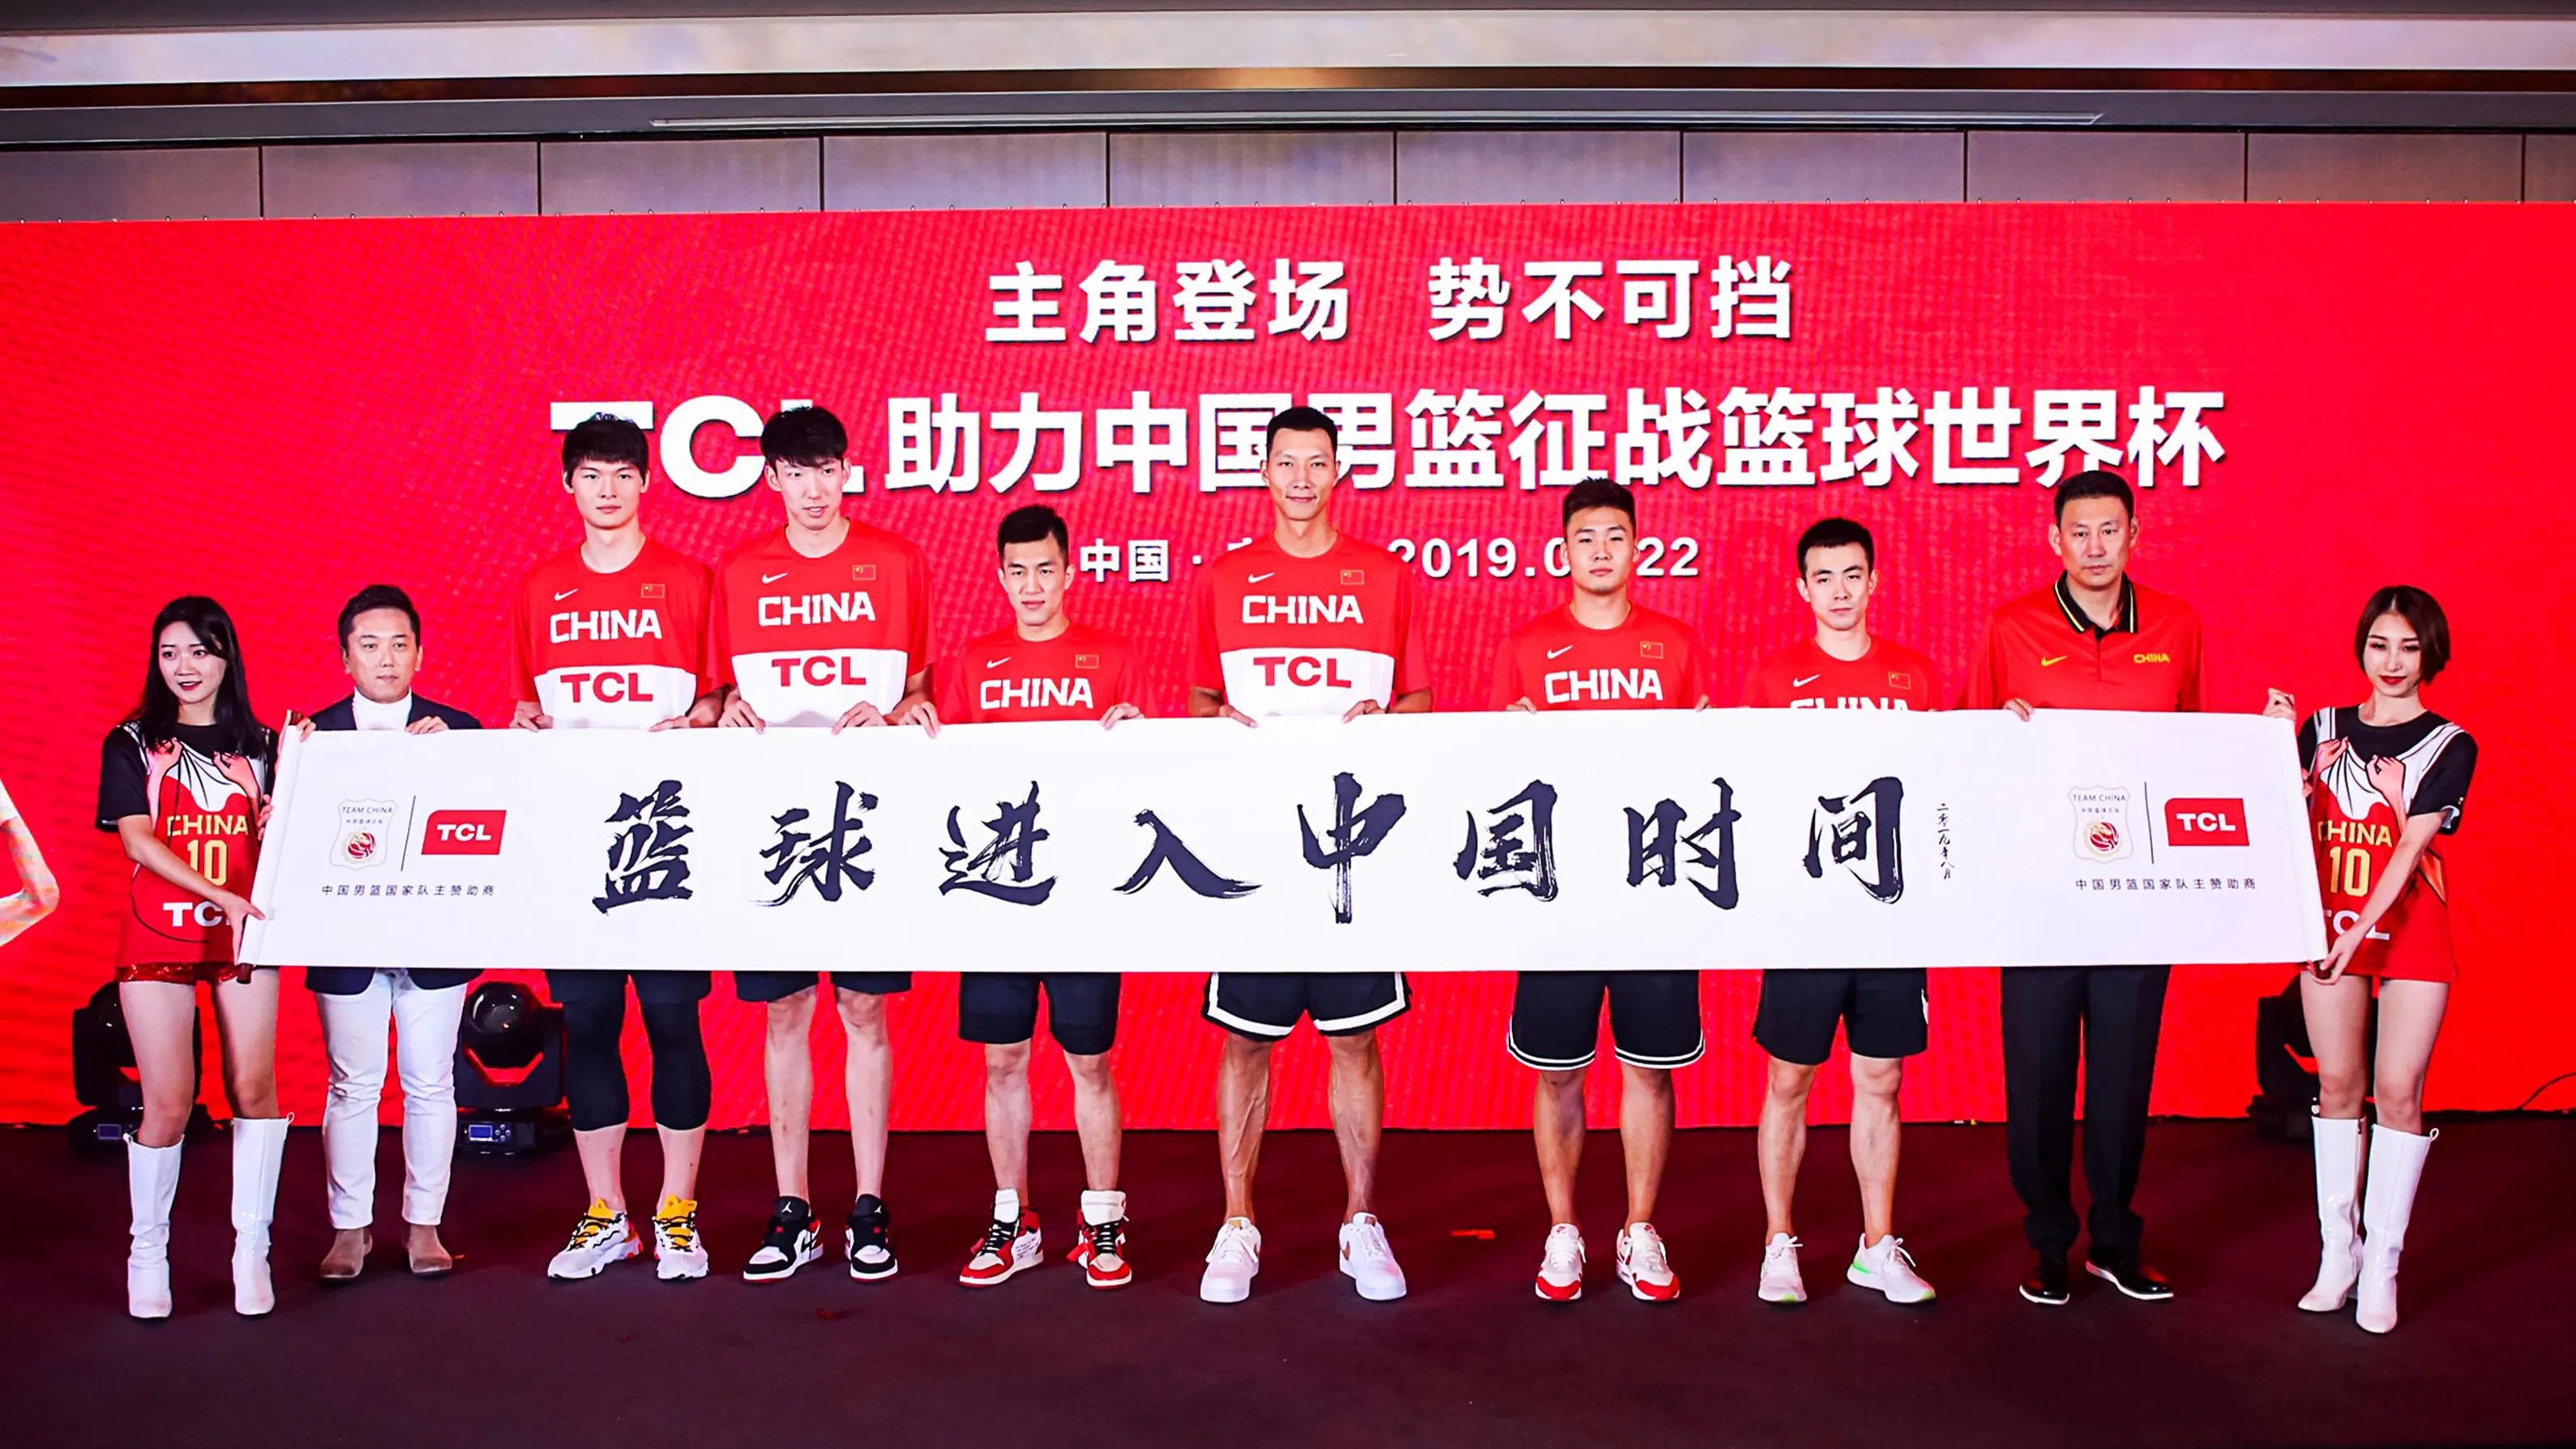 China Men's Basketball Team Signed Main Sponsor to Prepare for the Asian Championship